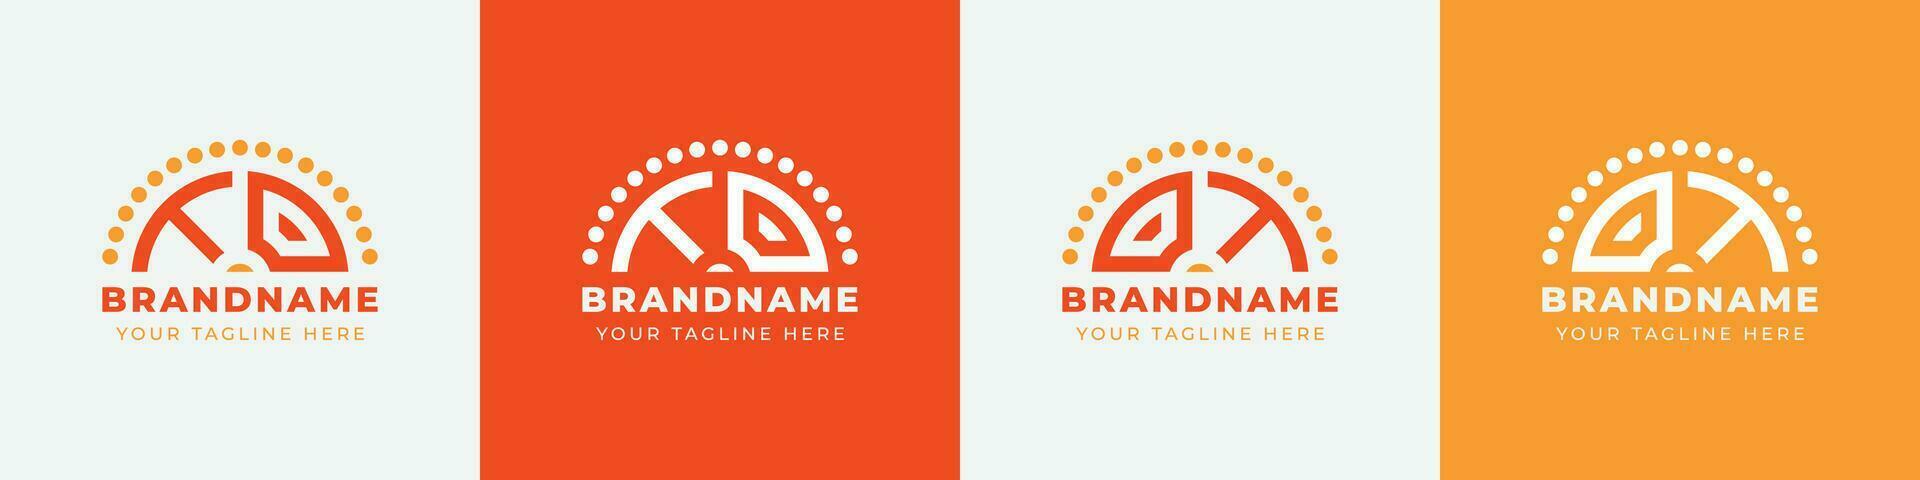 Letter OT and TO Sunrise  Logo Set, suitable for any business with OT or TO initials. vector